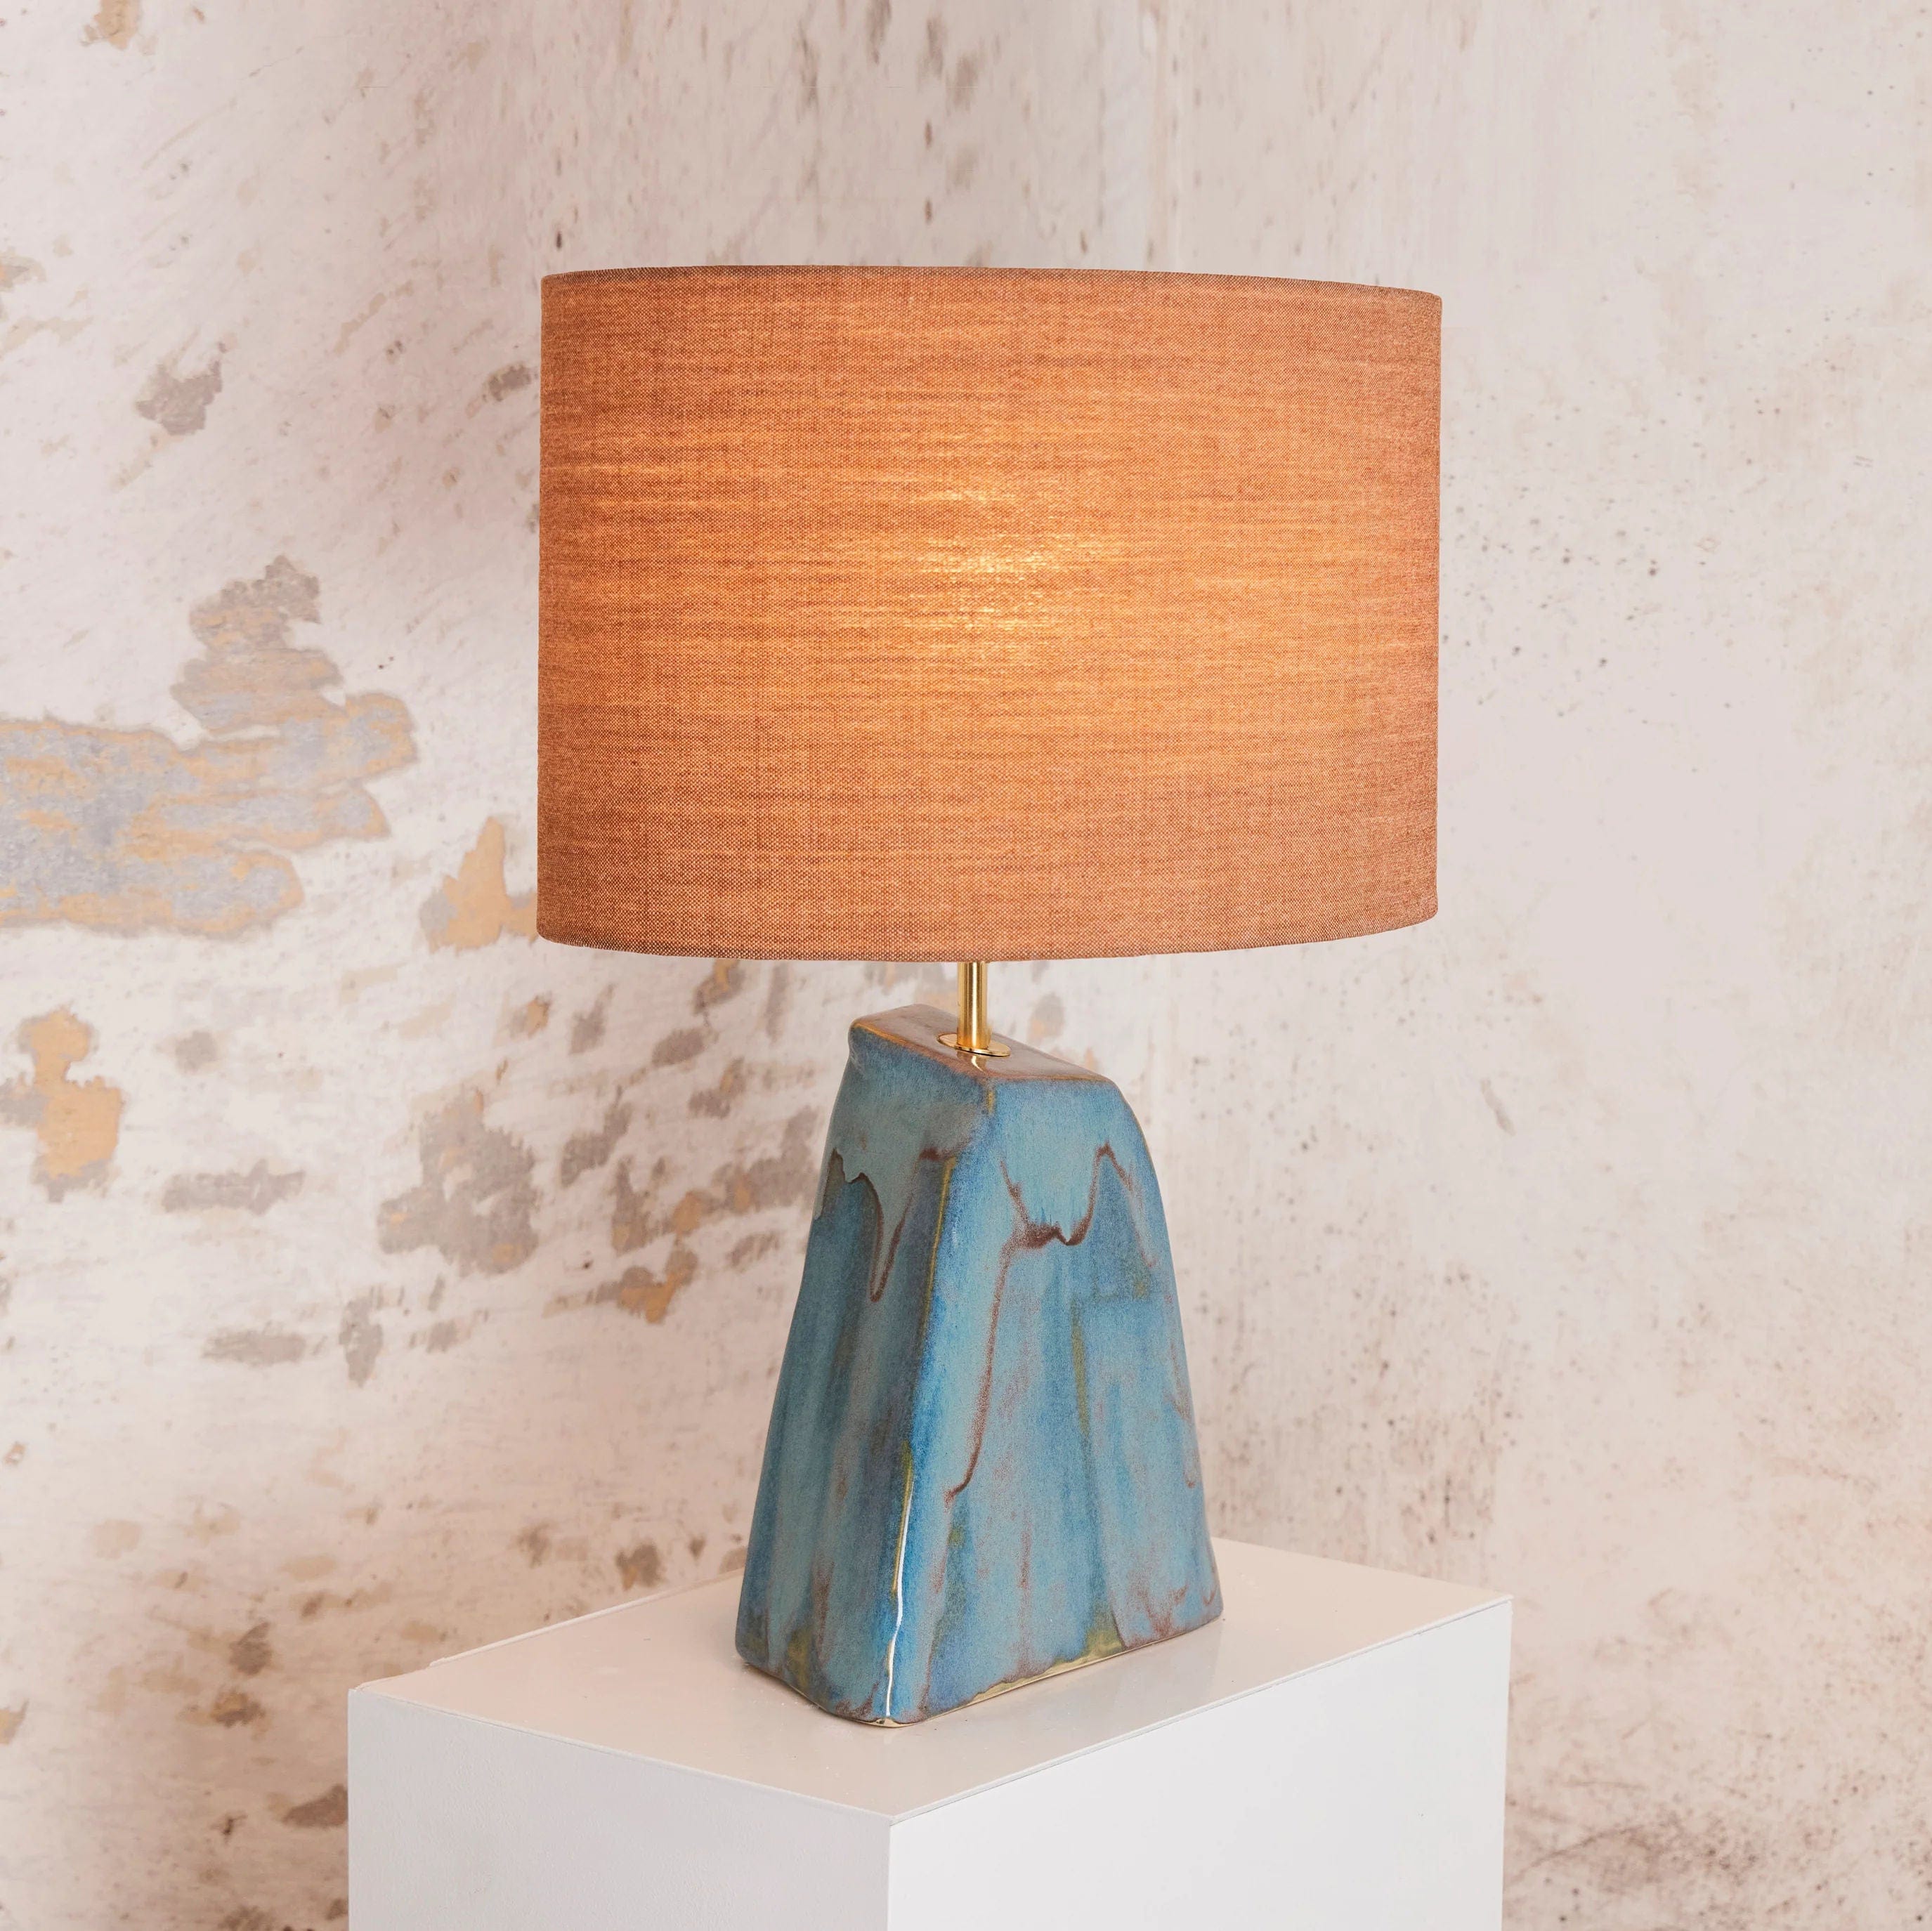 A Triangular Ceramic Lamp with unique blue and copper base by Project 213A and a cylindrical orange shade, illuminated and placed on a white pedestal against a textured wall.